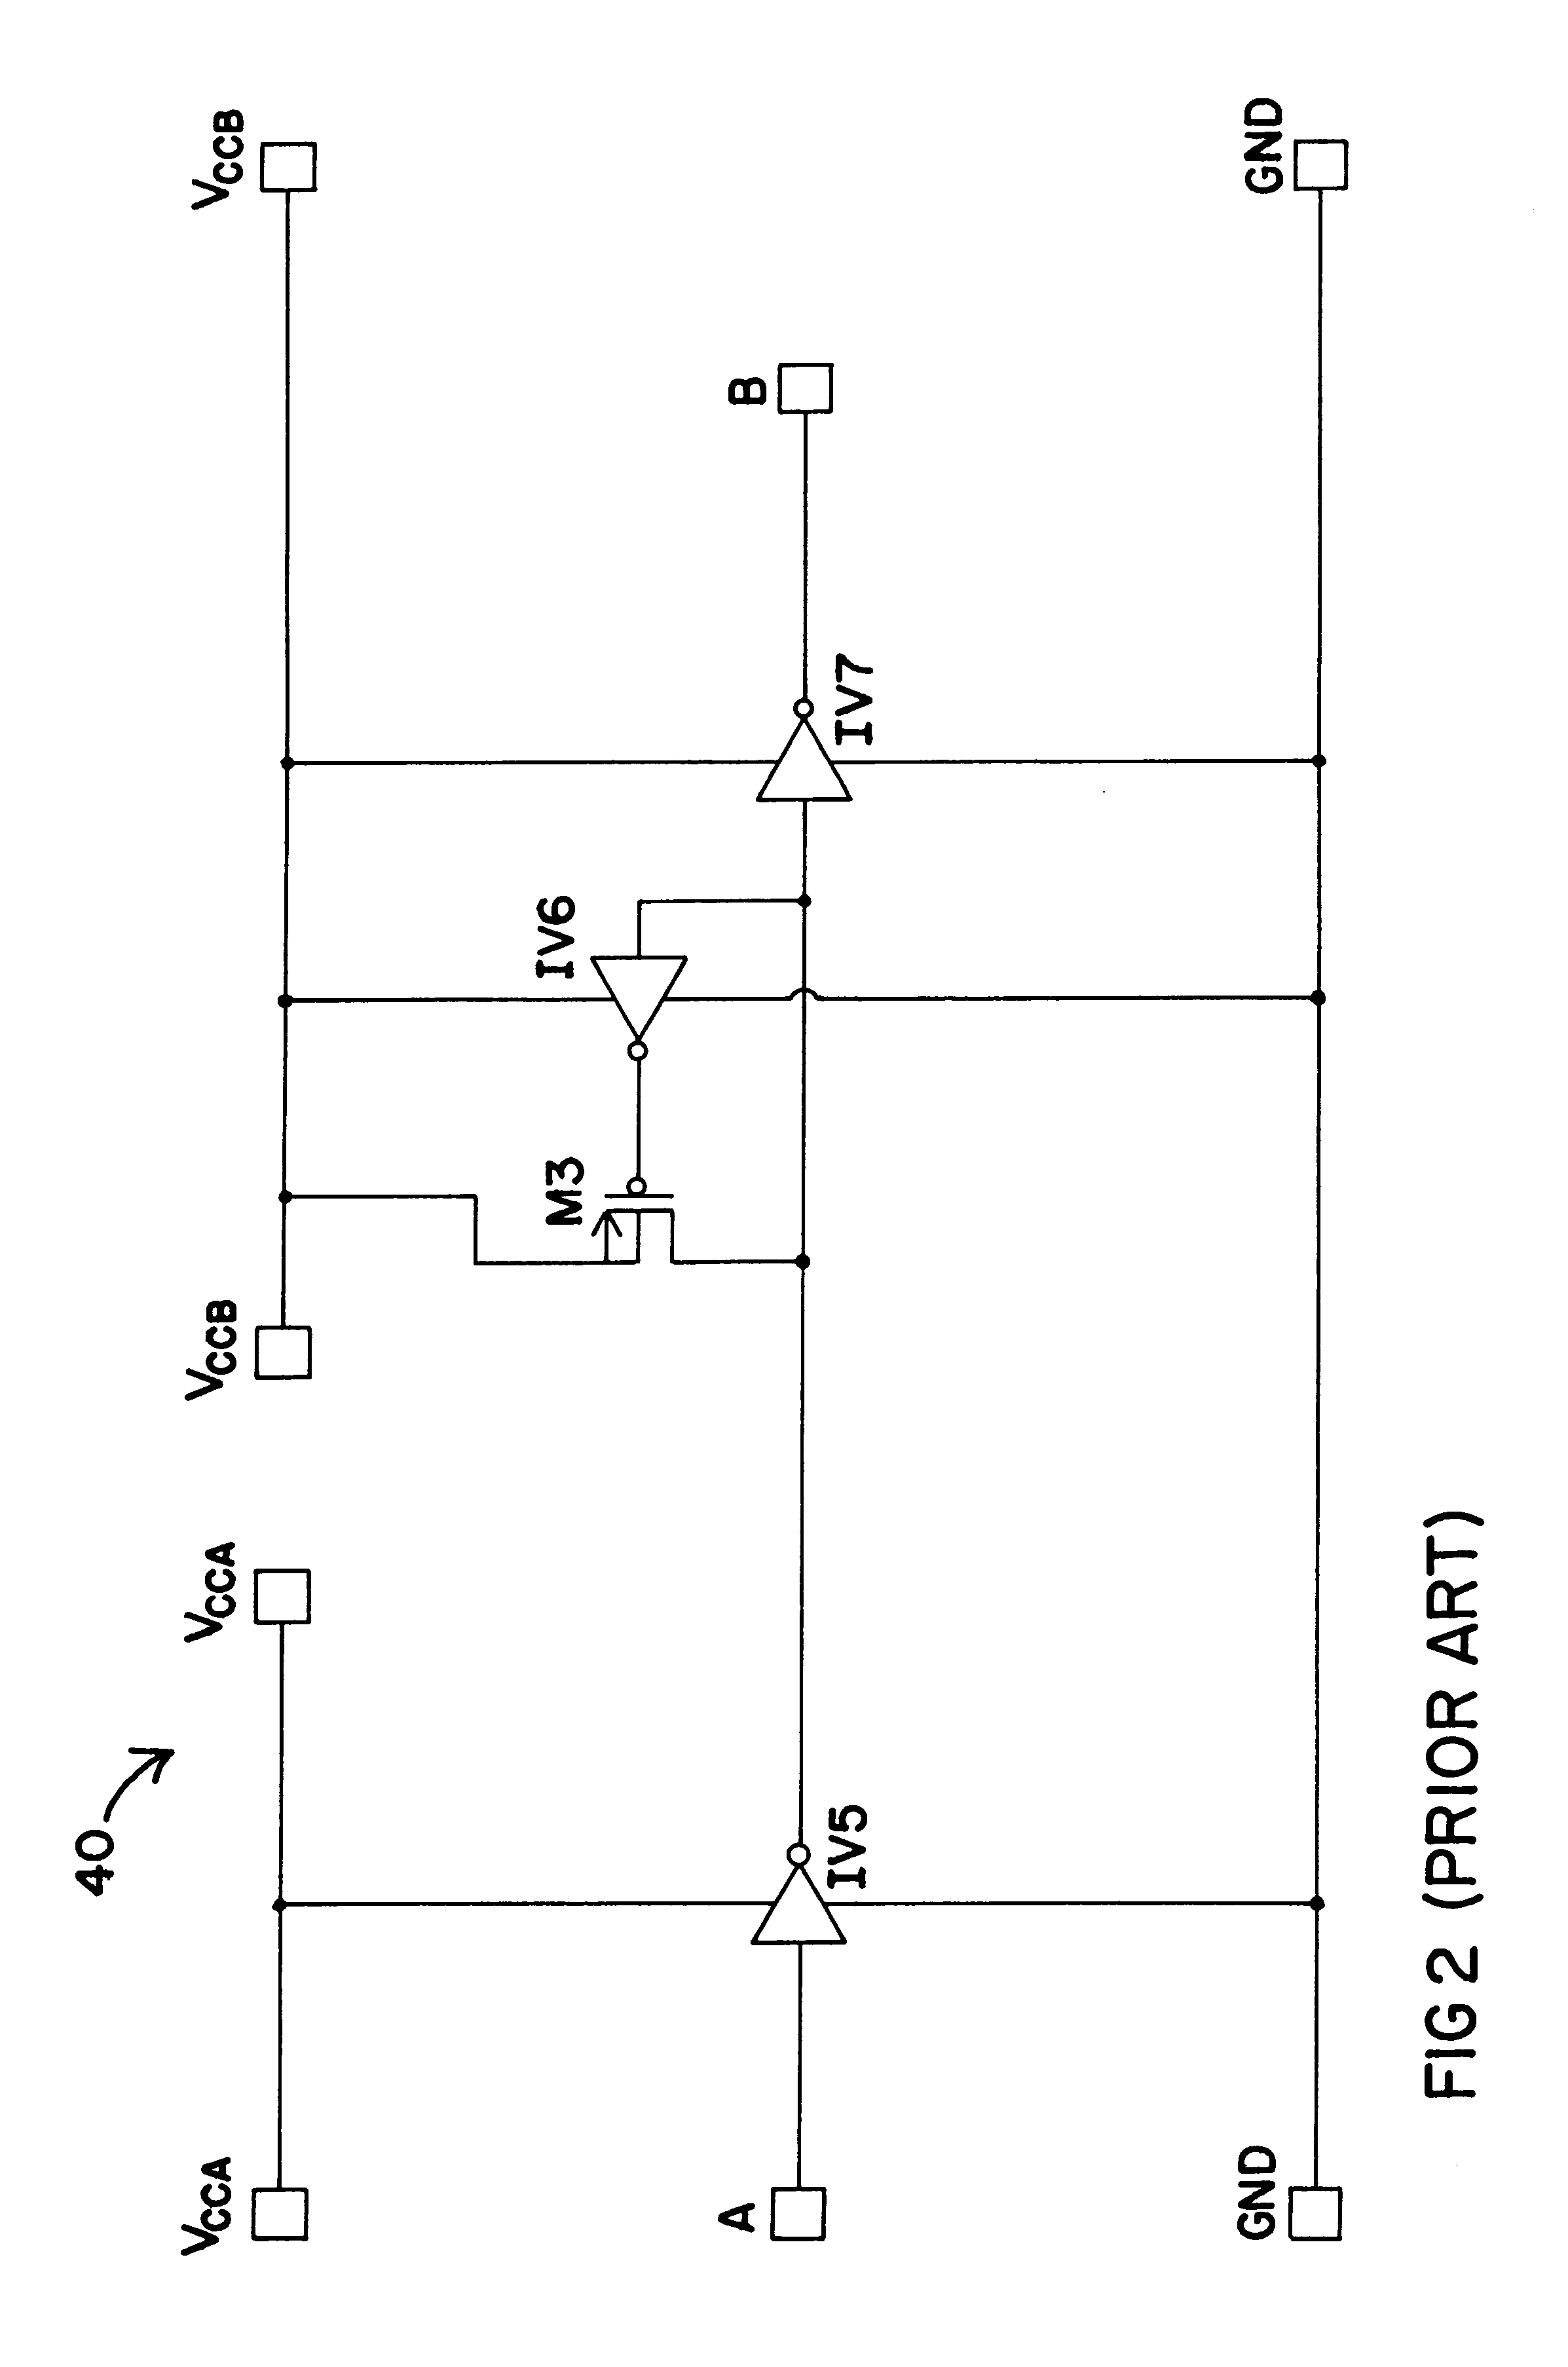 Power-on reset circuit for dual-supply system